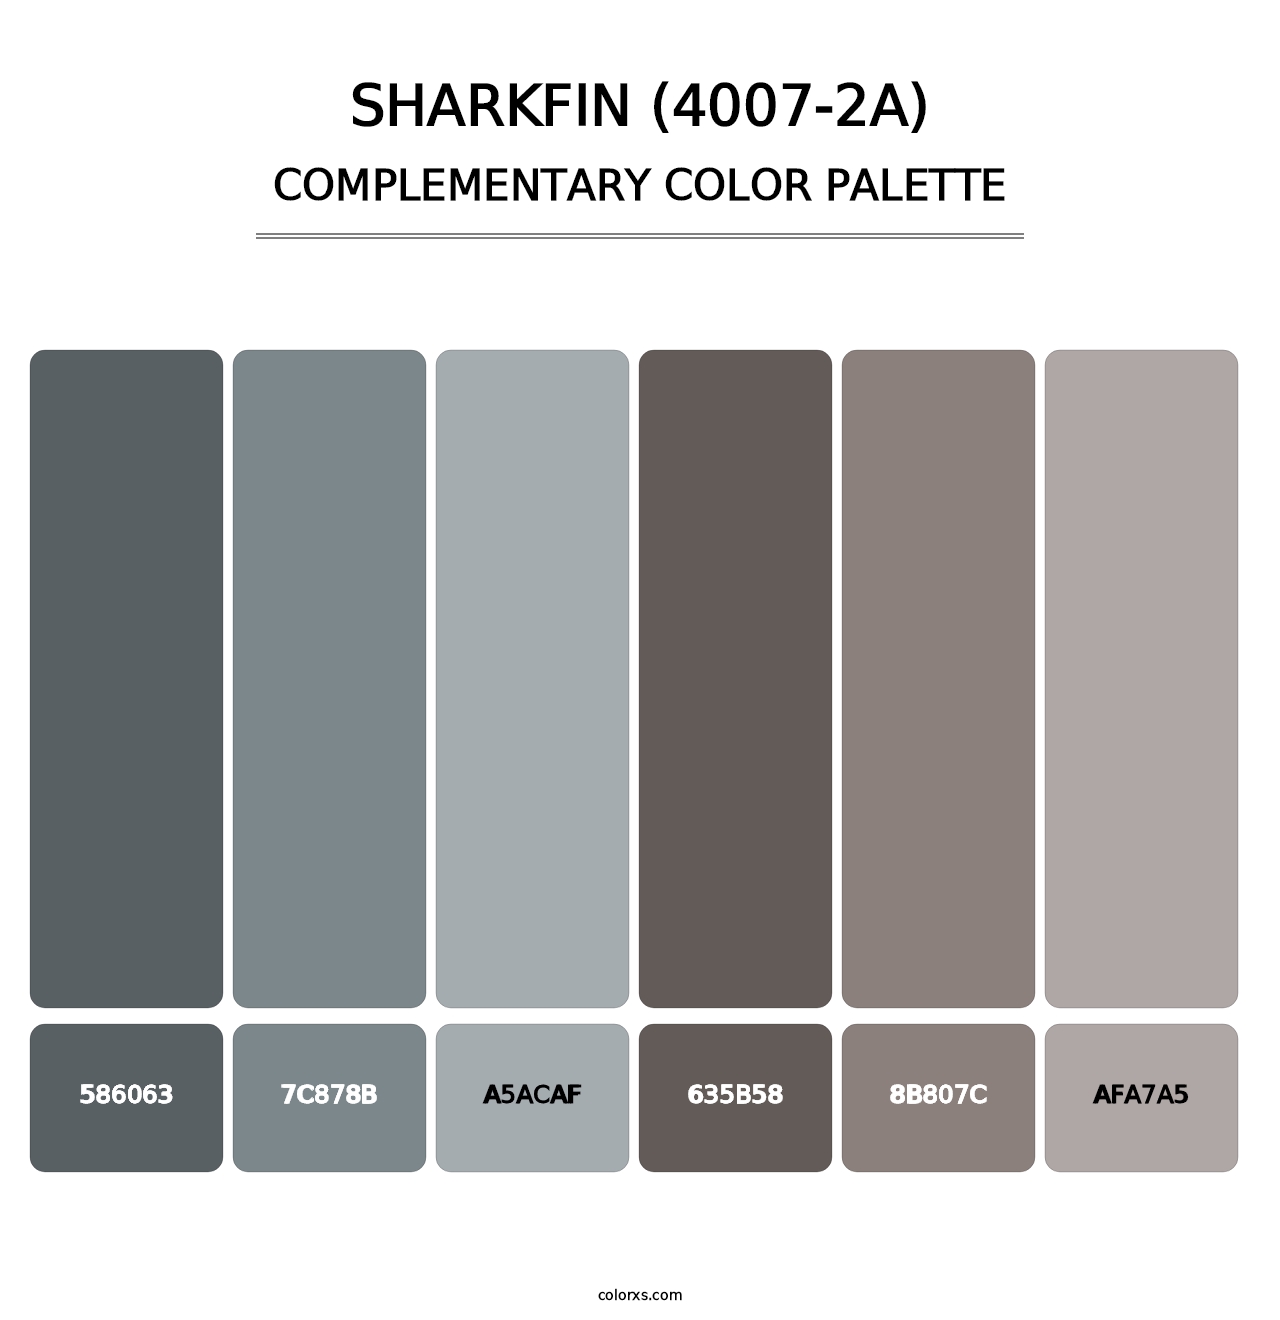 Sharkfin (4007-2A) - Complementary Color Palette